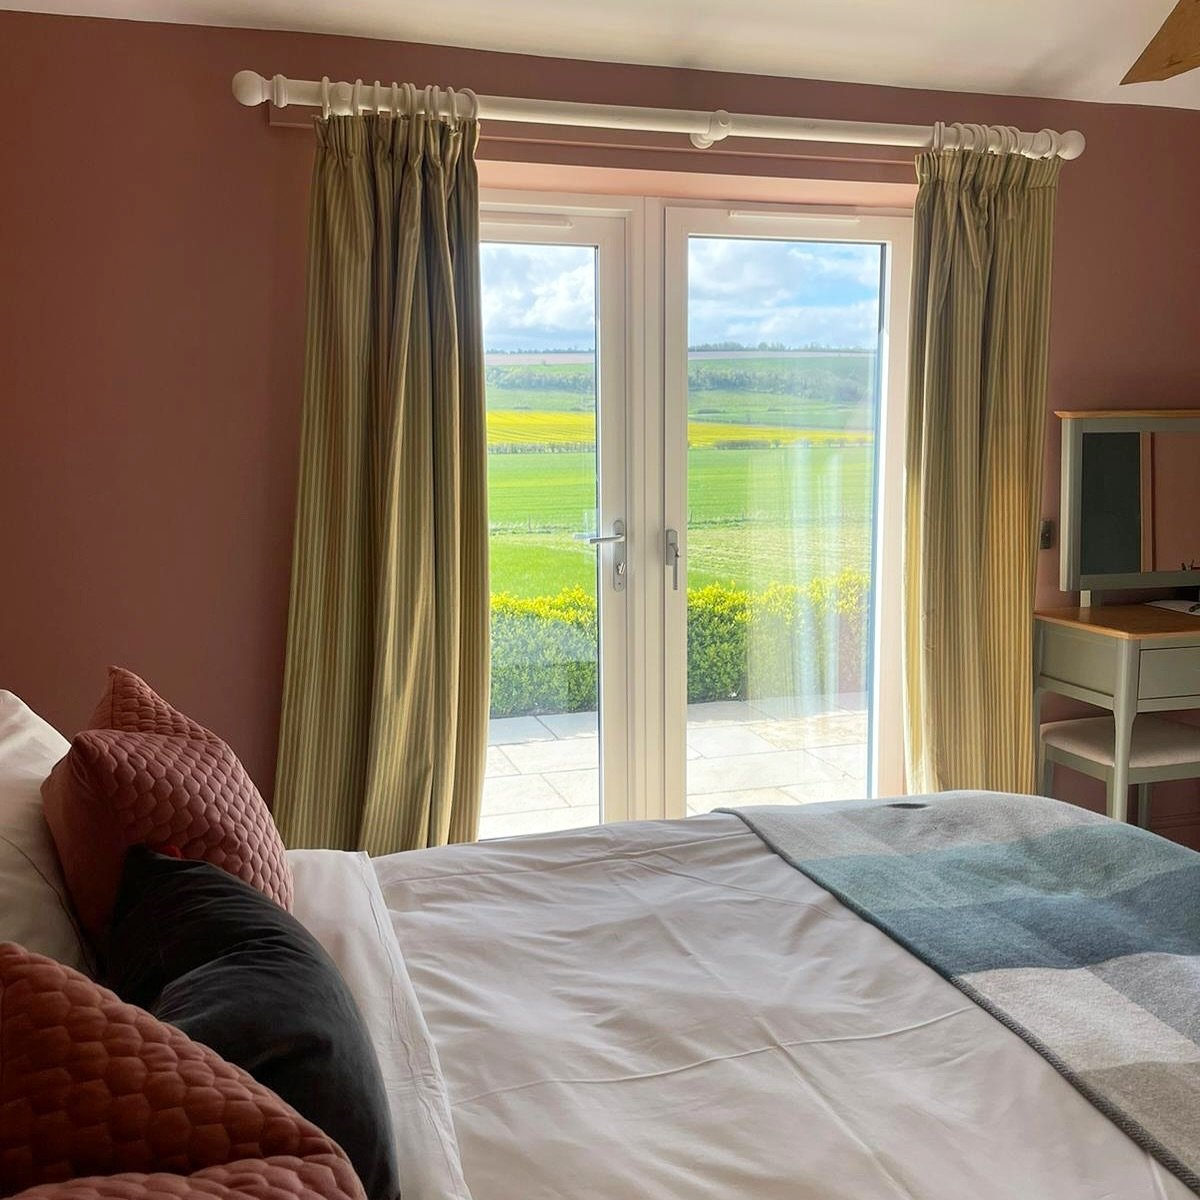 ✨ A Room With A View ✨
(All our rooms come with a view!)